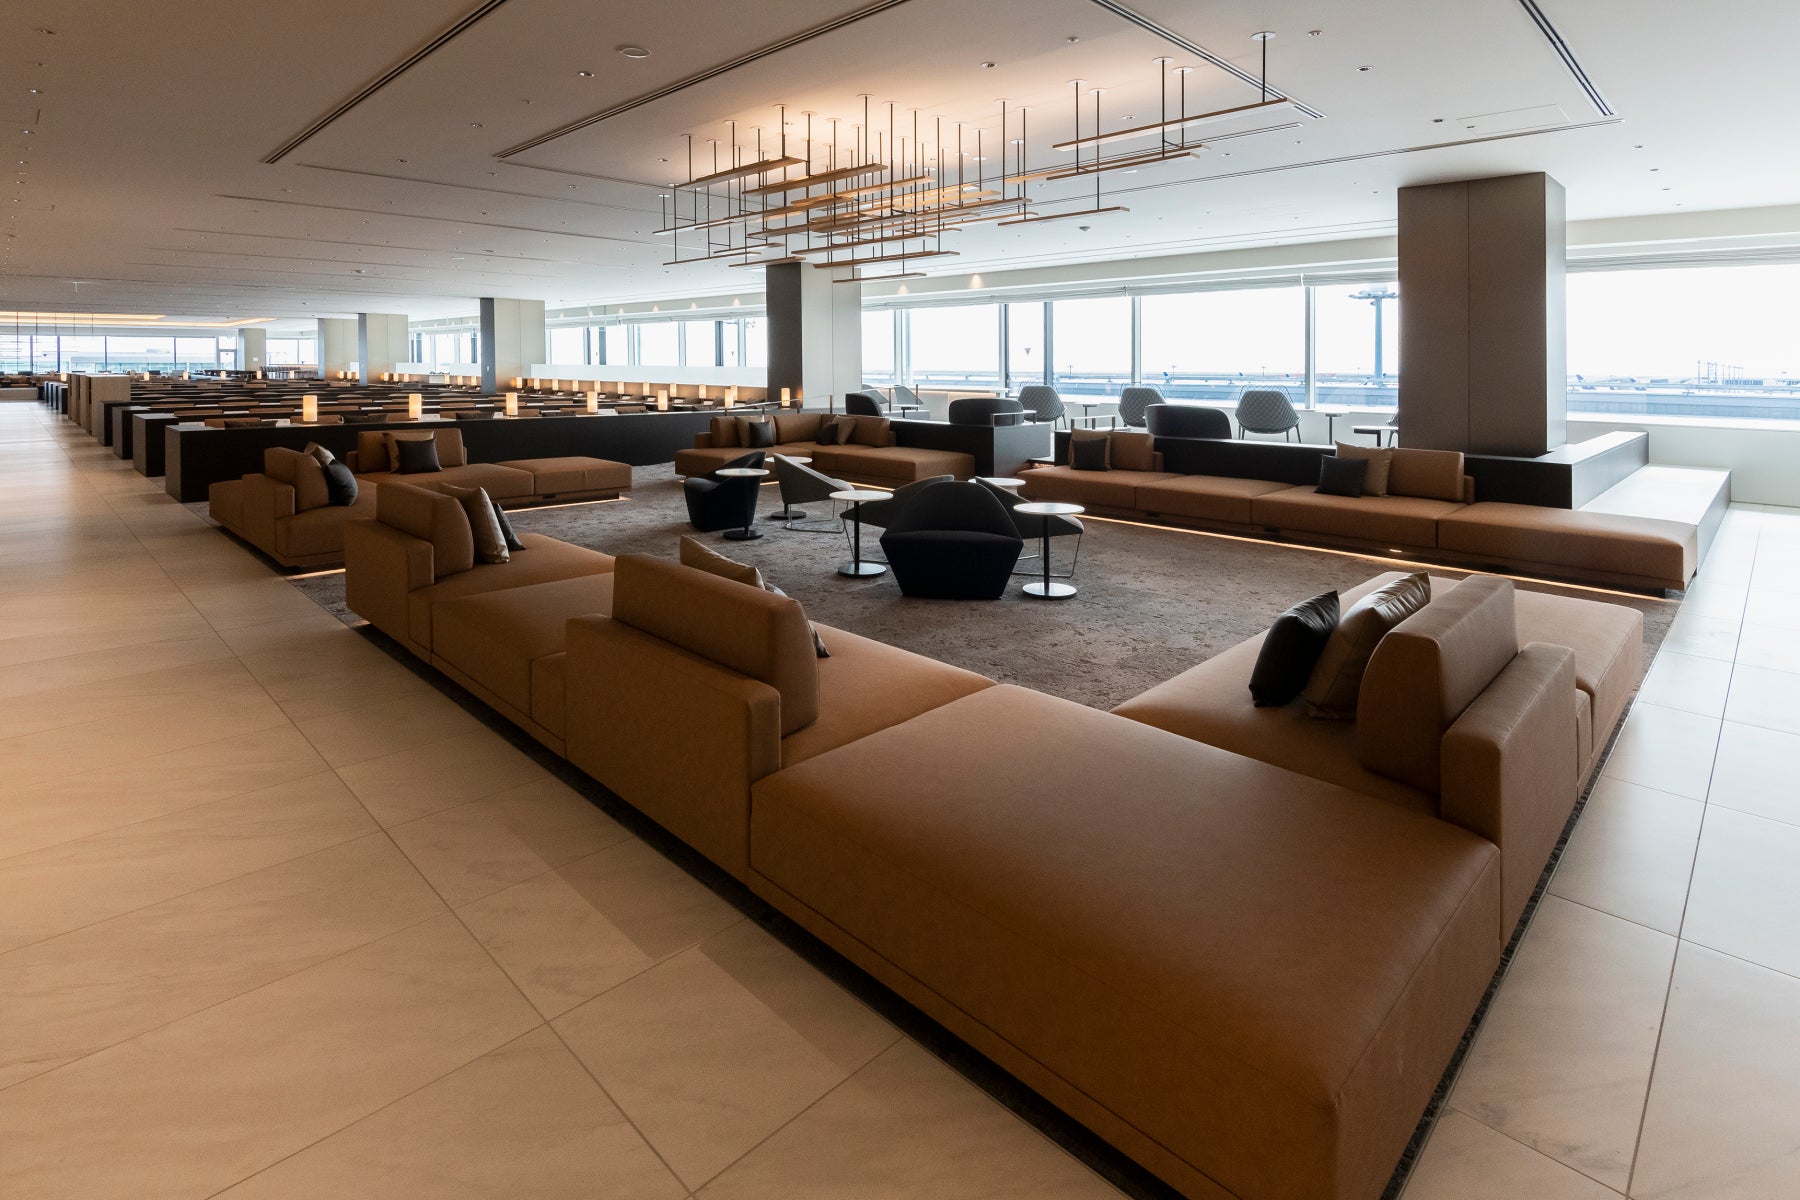 seating at a large airport lounge before visitors come in